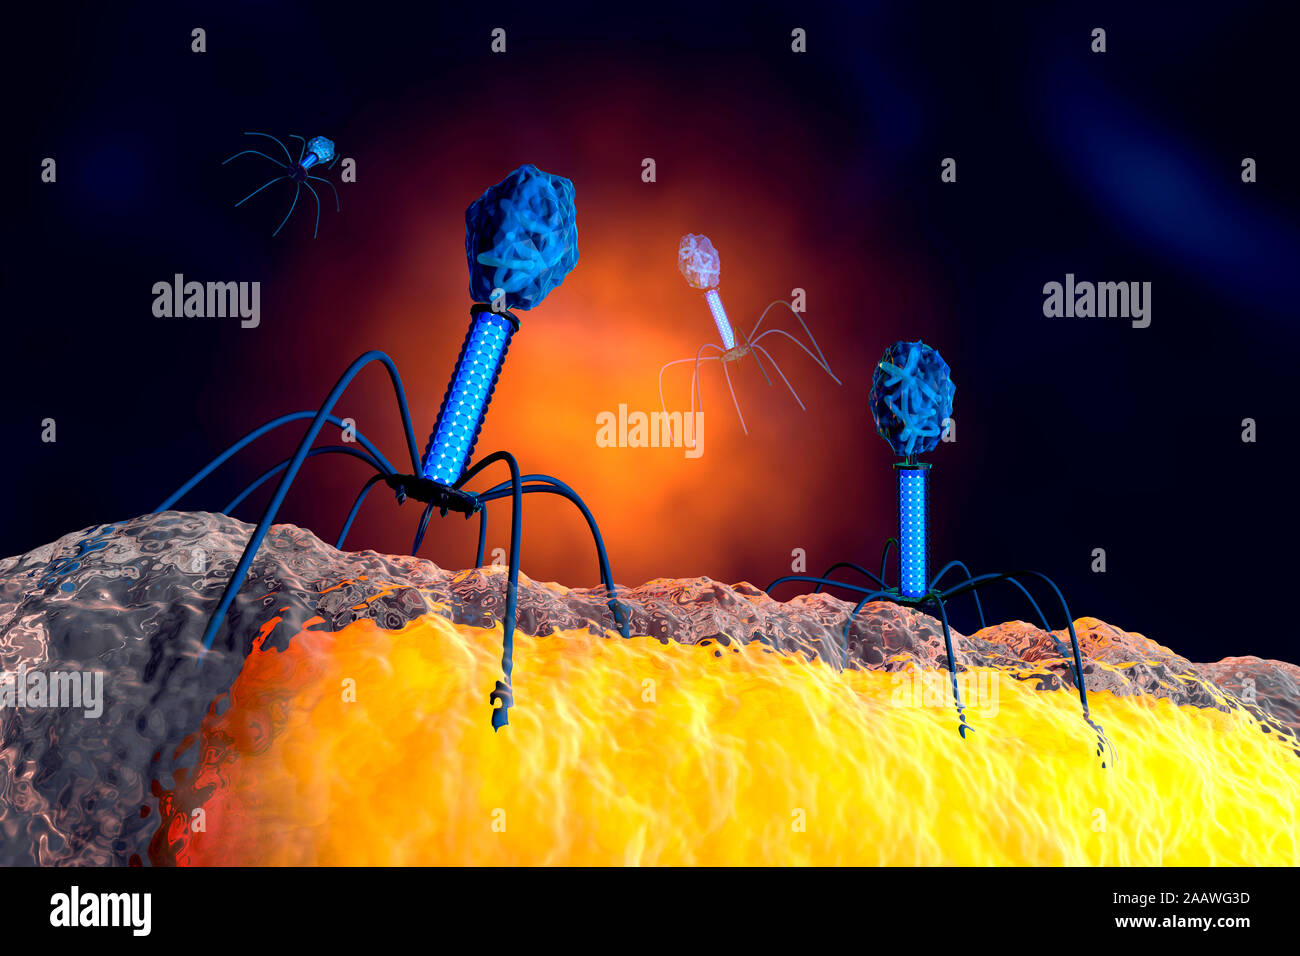 Illustration of anatomically correct group of bacteriophage viruses attacking bacteria Stock Photo